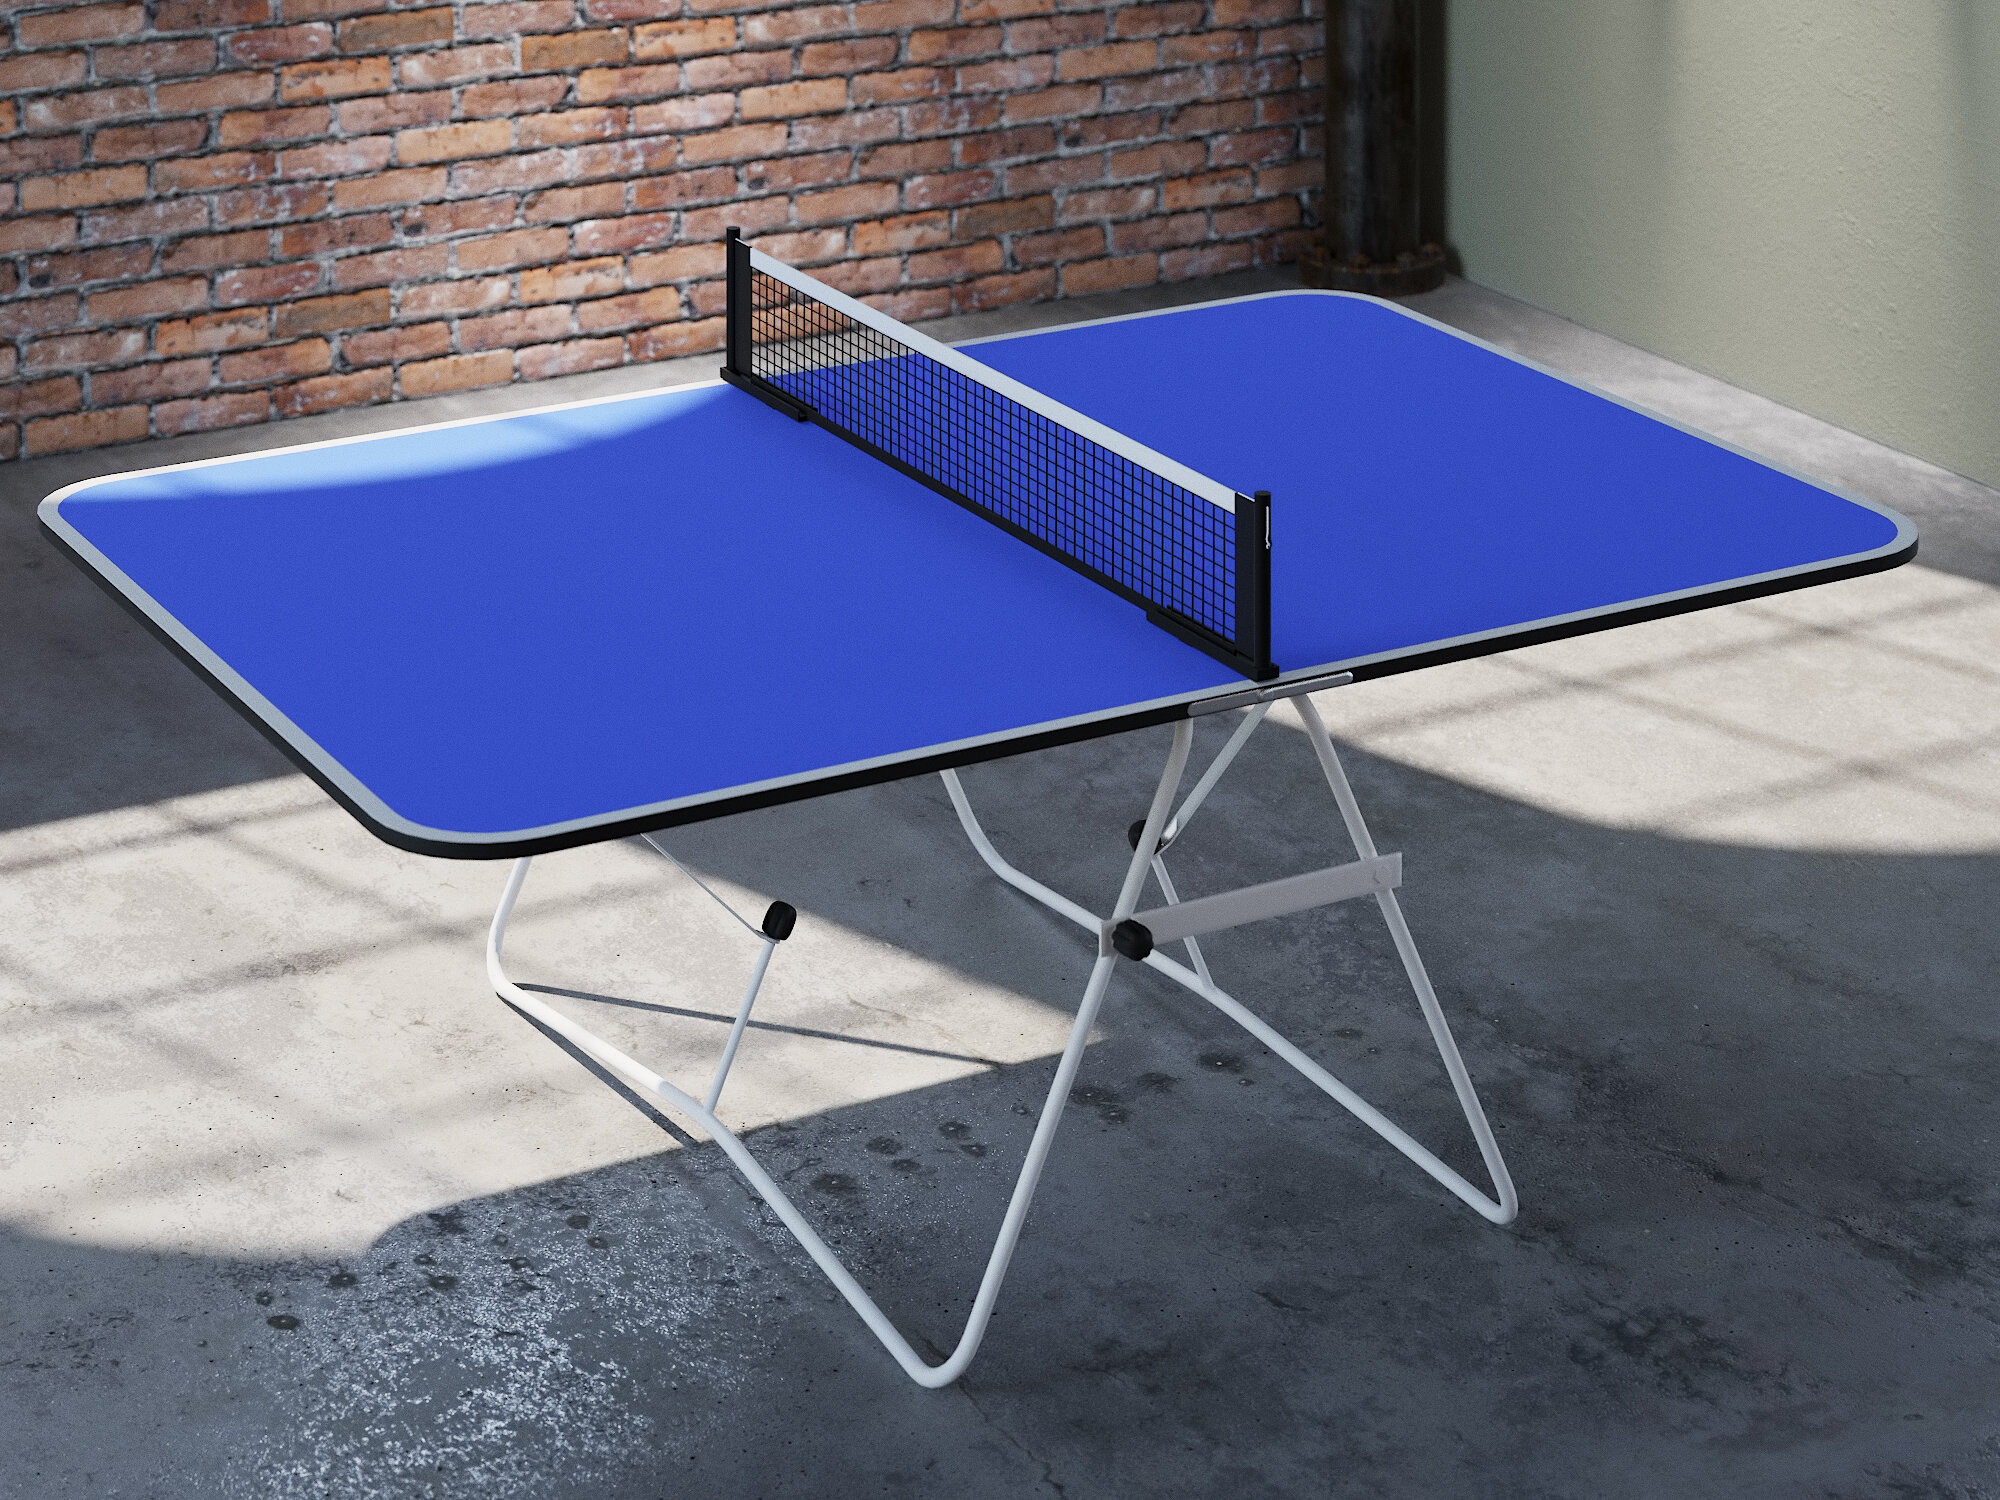 Butterfly Family Mini Foldable Indoor Table Tennis Table and Reviews Wayfair